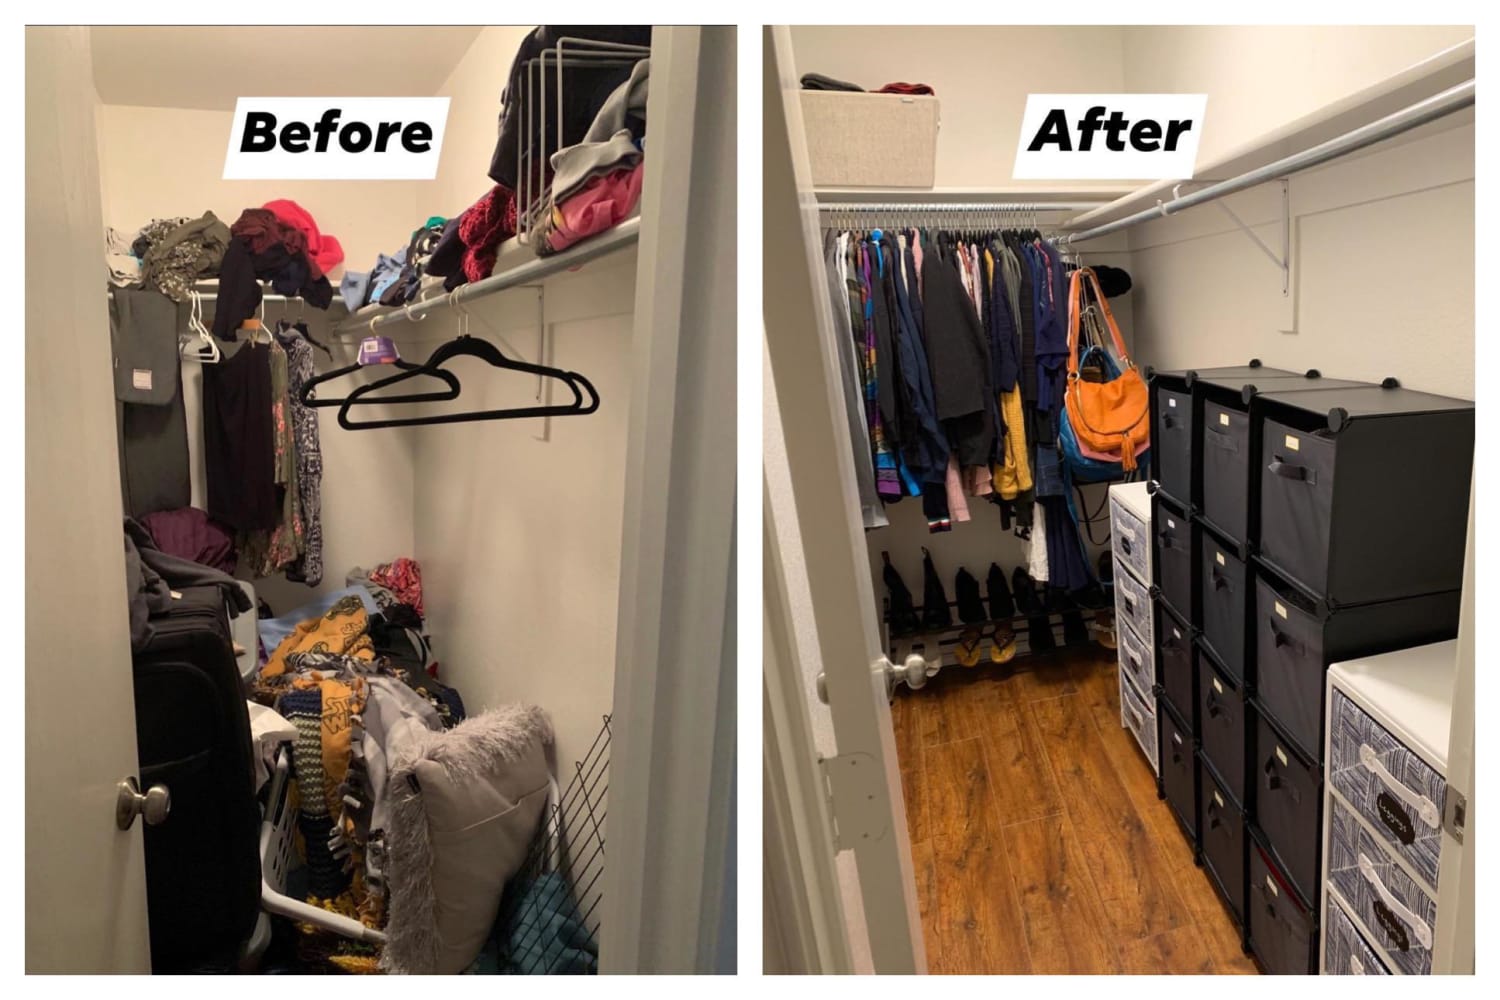 I’m finally taking better care of myself and got rid of more than 30 trash bags full of clothing that I had accumulated over the years. I cannot express how satisfying it was to see that first spot of floor underneath all of that mess.